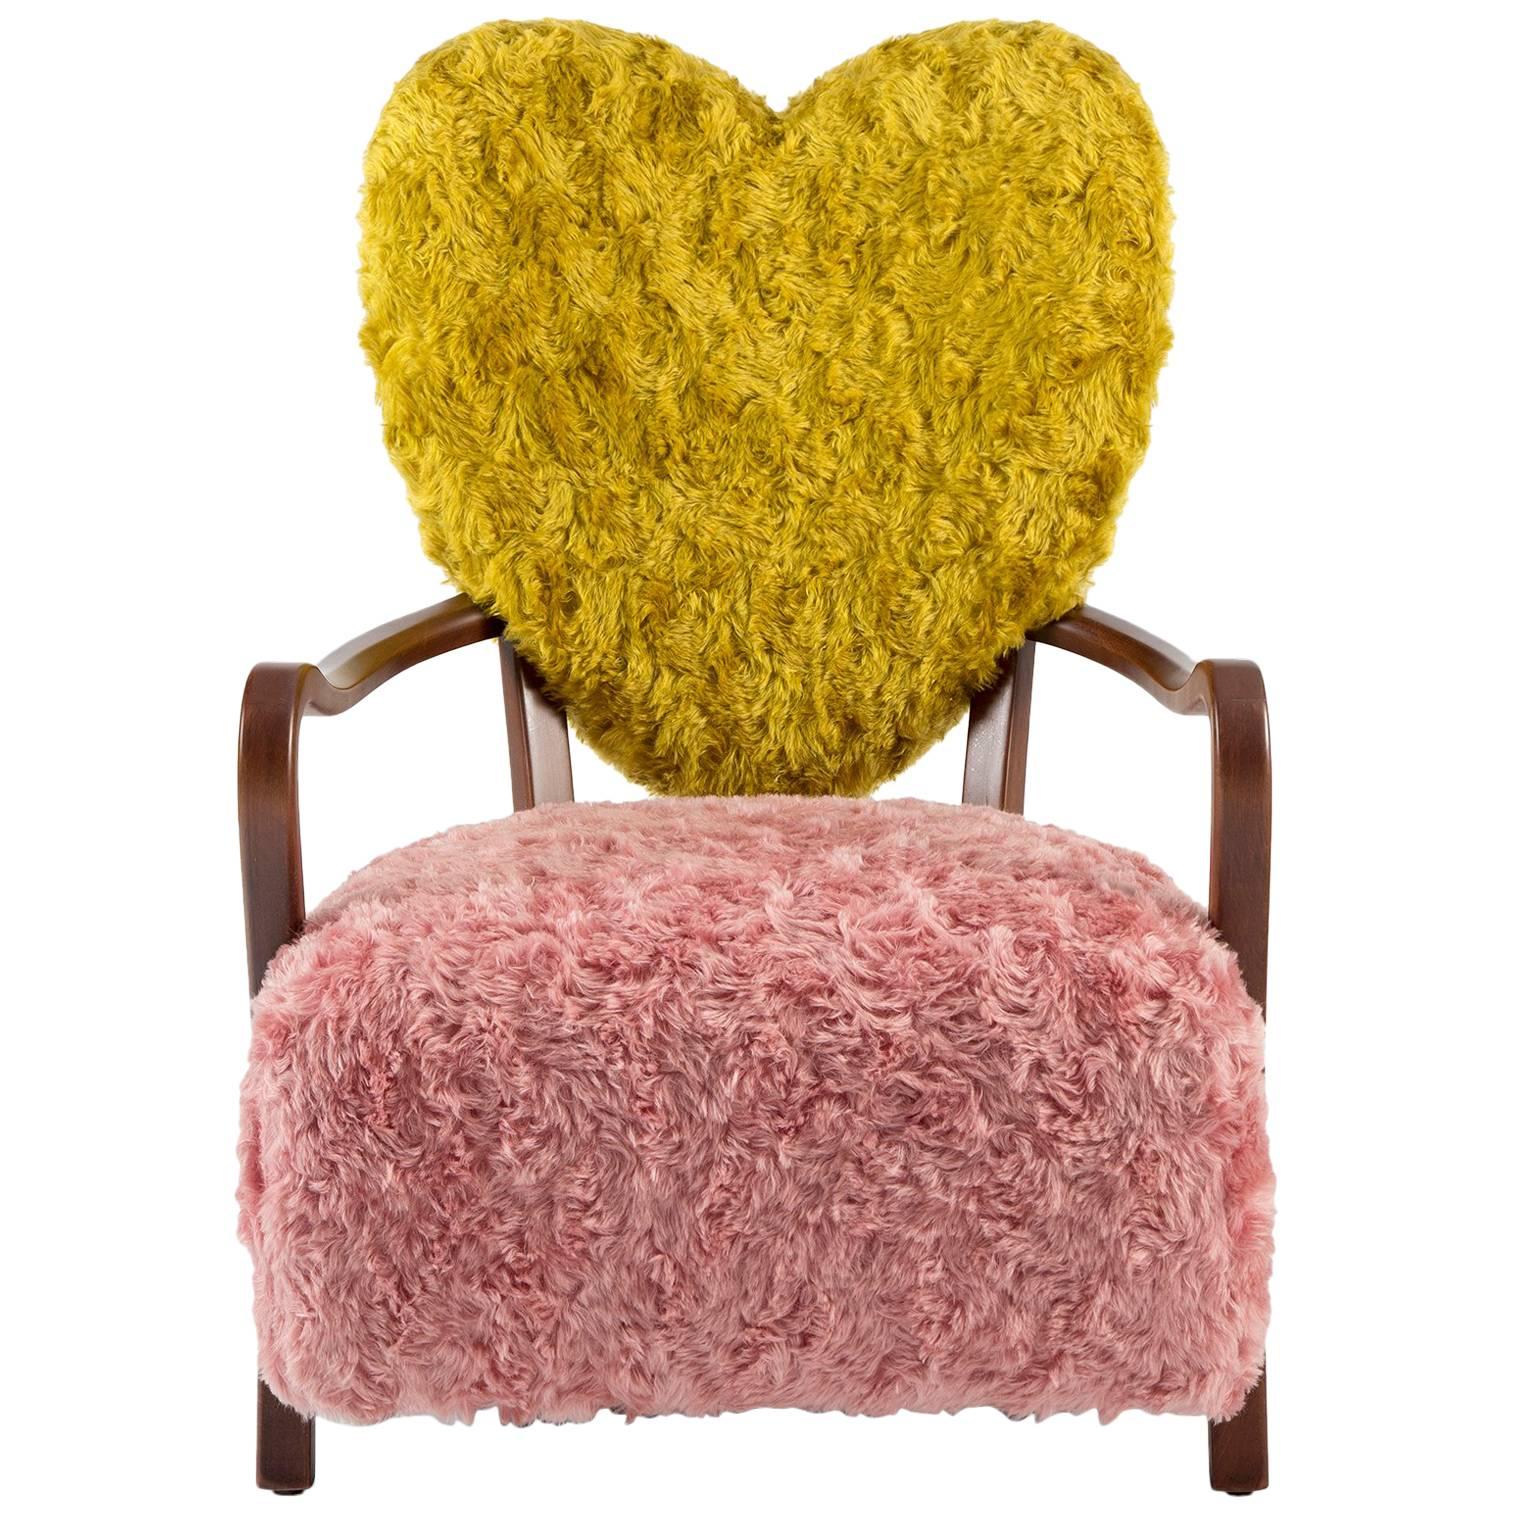 Contemporary Uni Armchair with Heart Shaped Back and Pink and Yellow Mohair